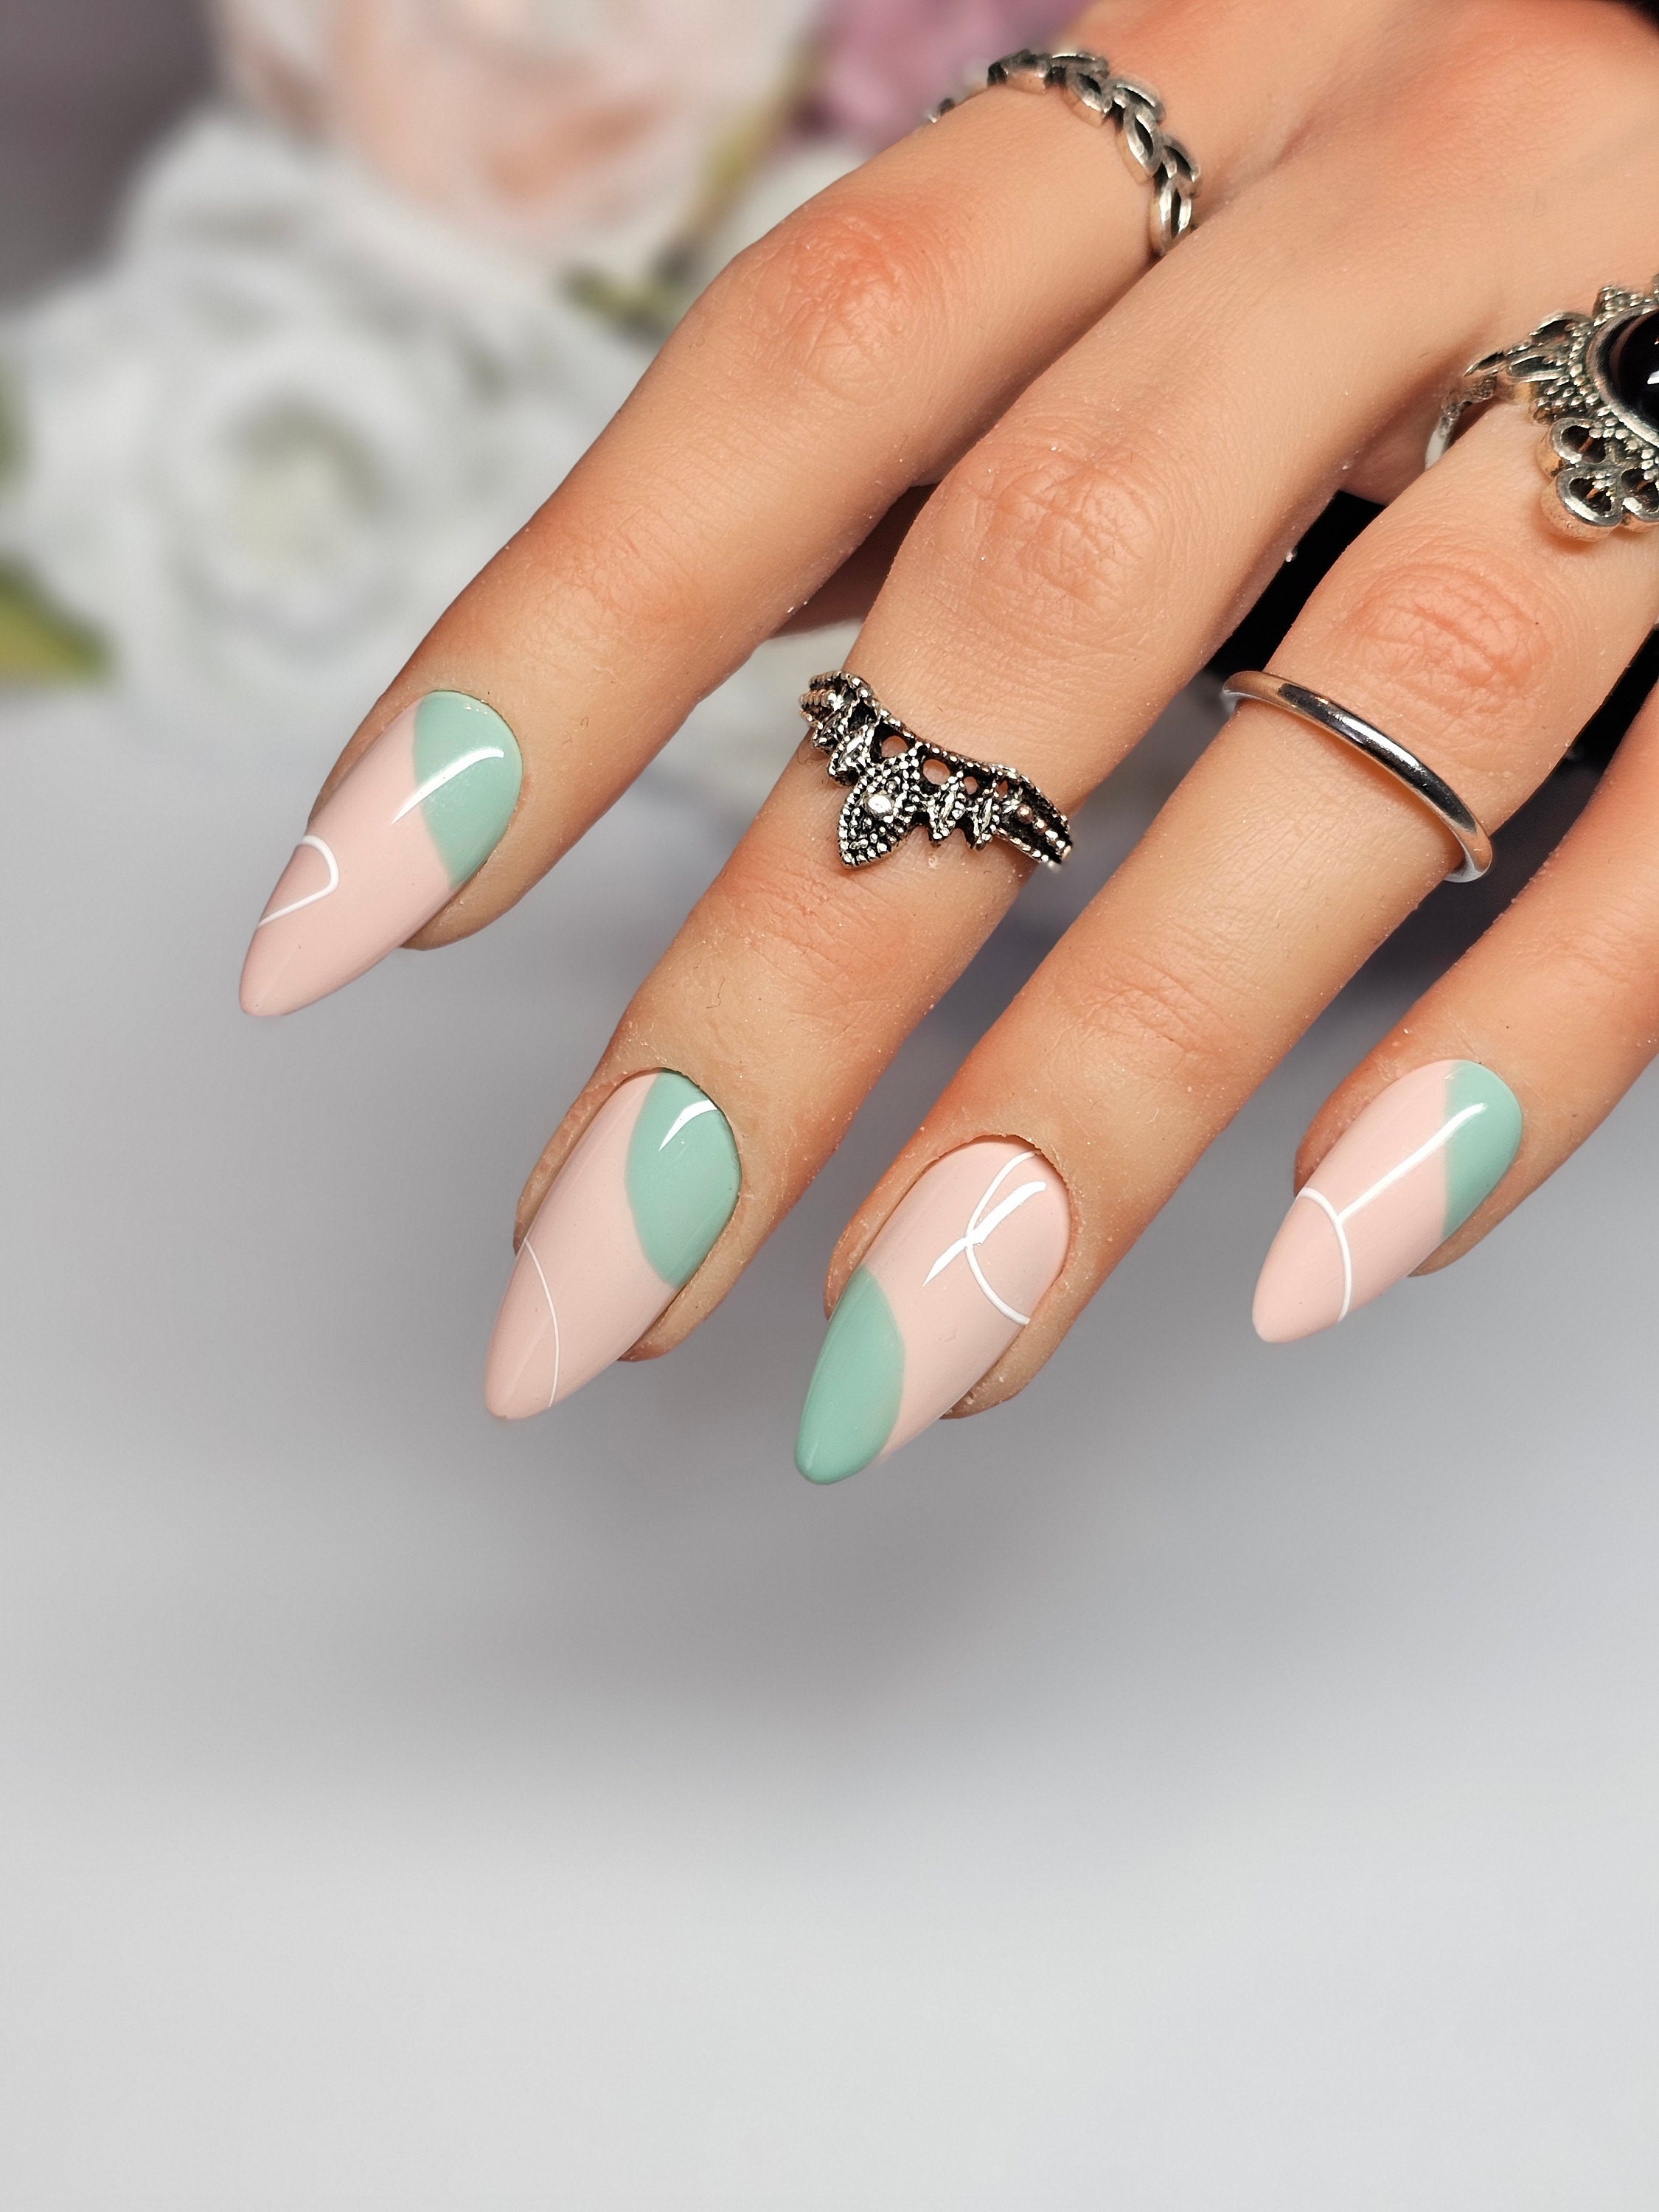 33 On-Trend Chrome Nail Designs To Try - The Nail Tech Org